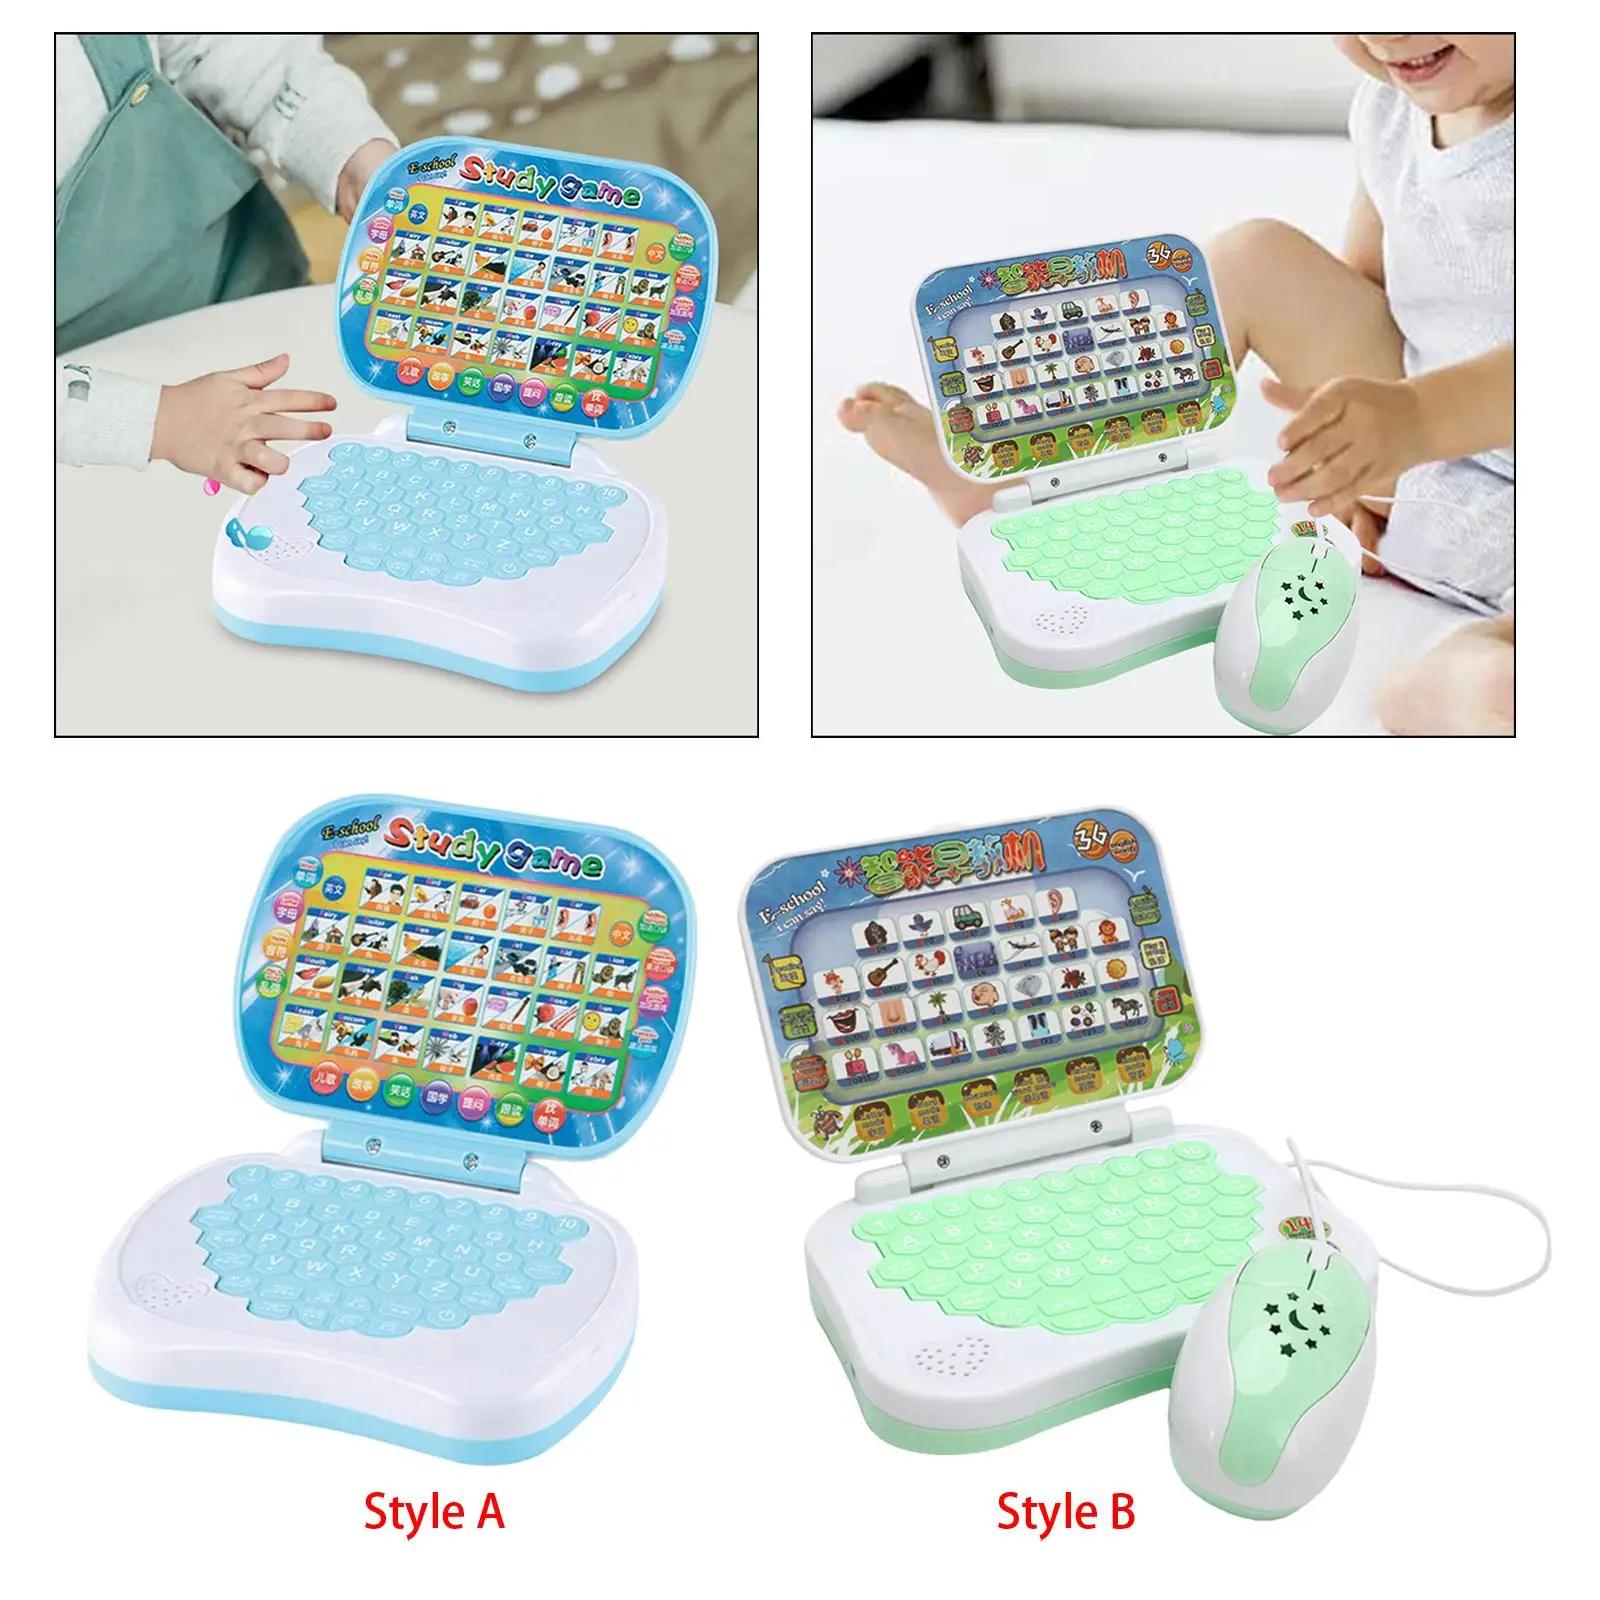 Learning Machine Activities Study Game English Early Education Toy Computer Kids Laptop Toy for Toddler Girls Boys Bithday Gifts